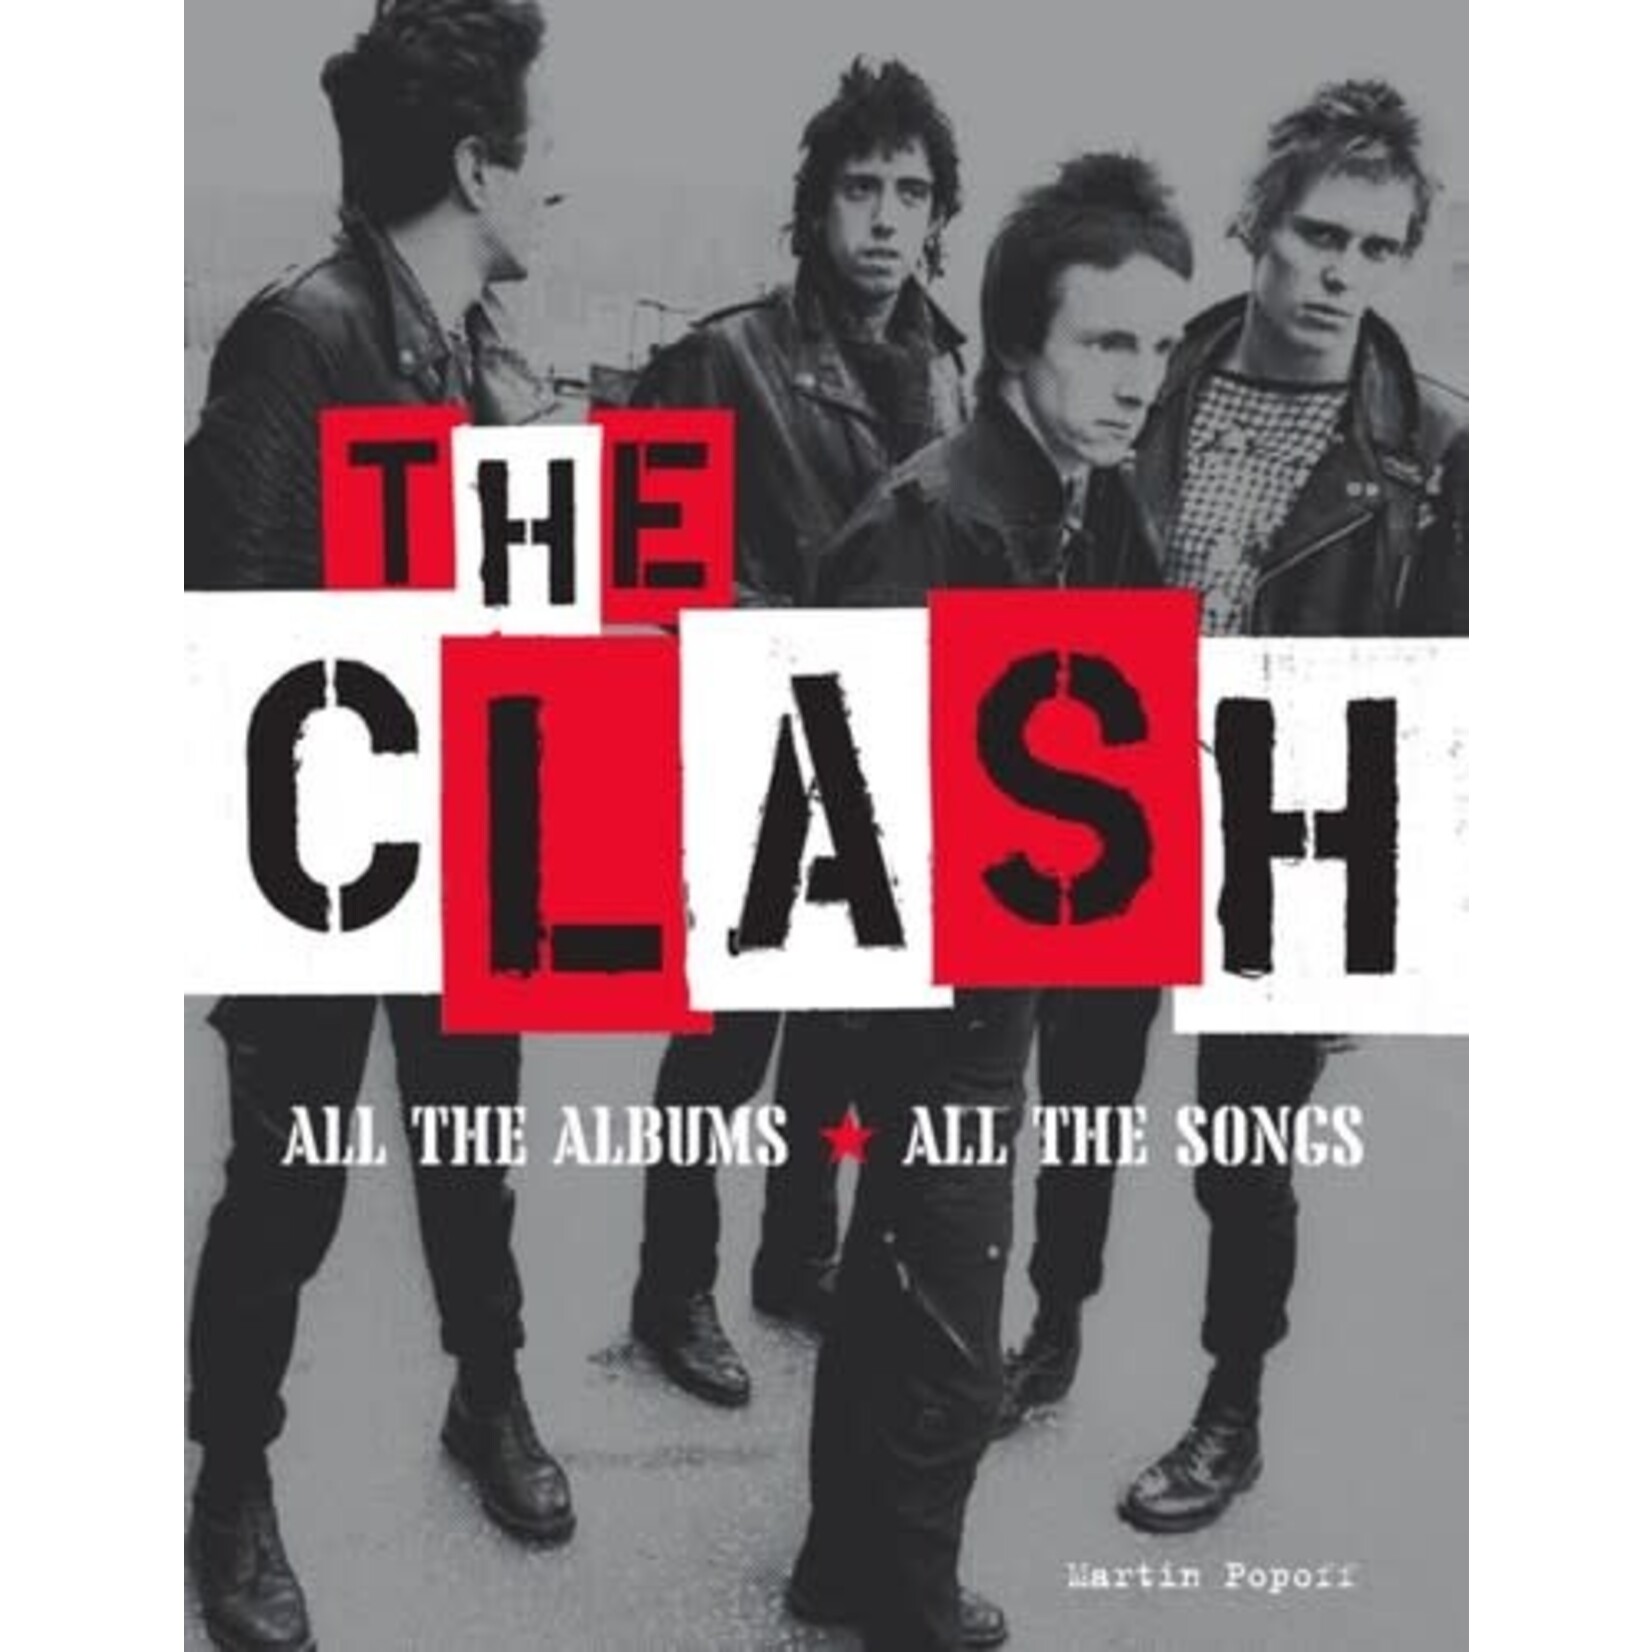 Clash - All The Albums, All The Songs (Book)